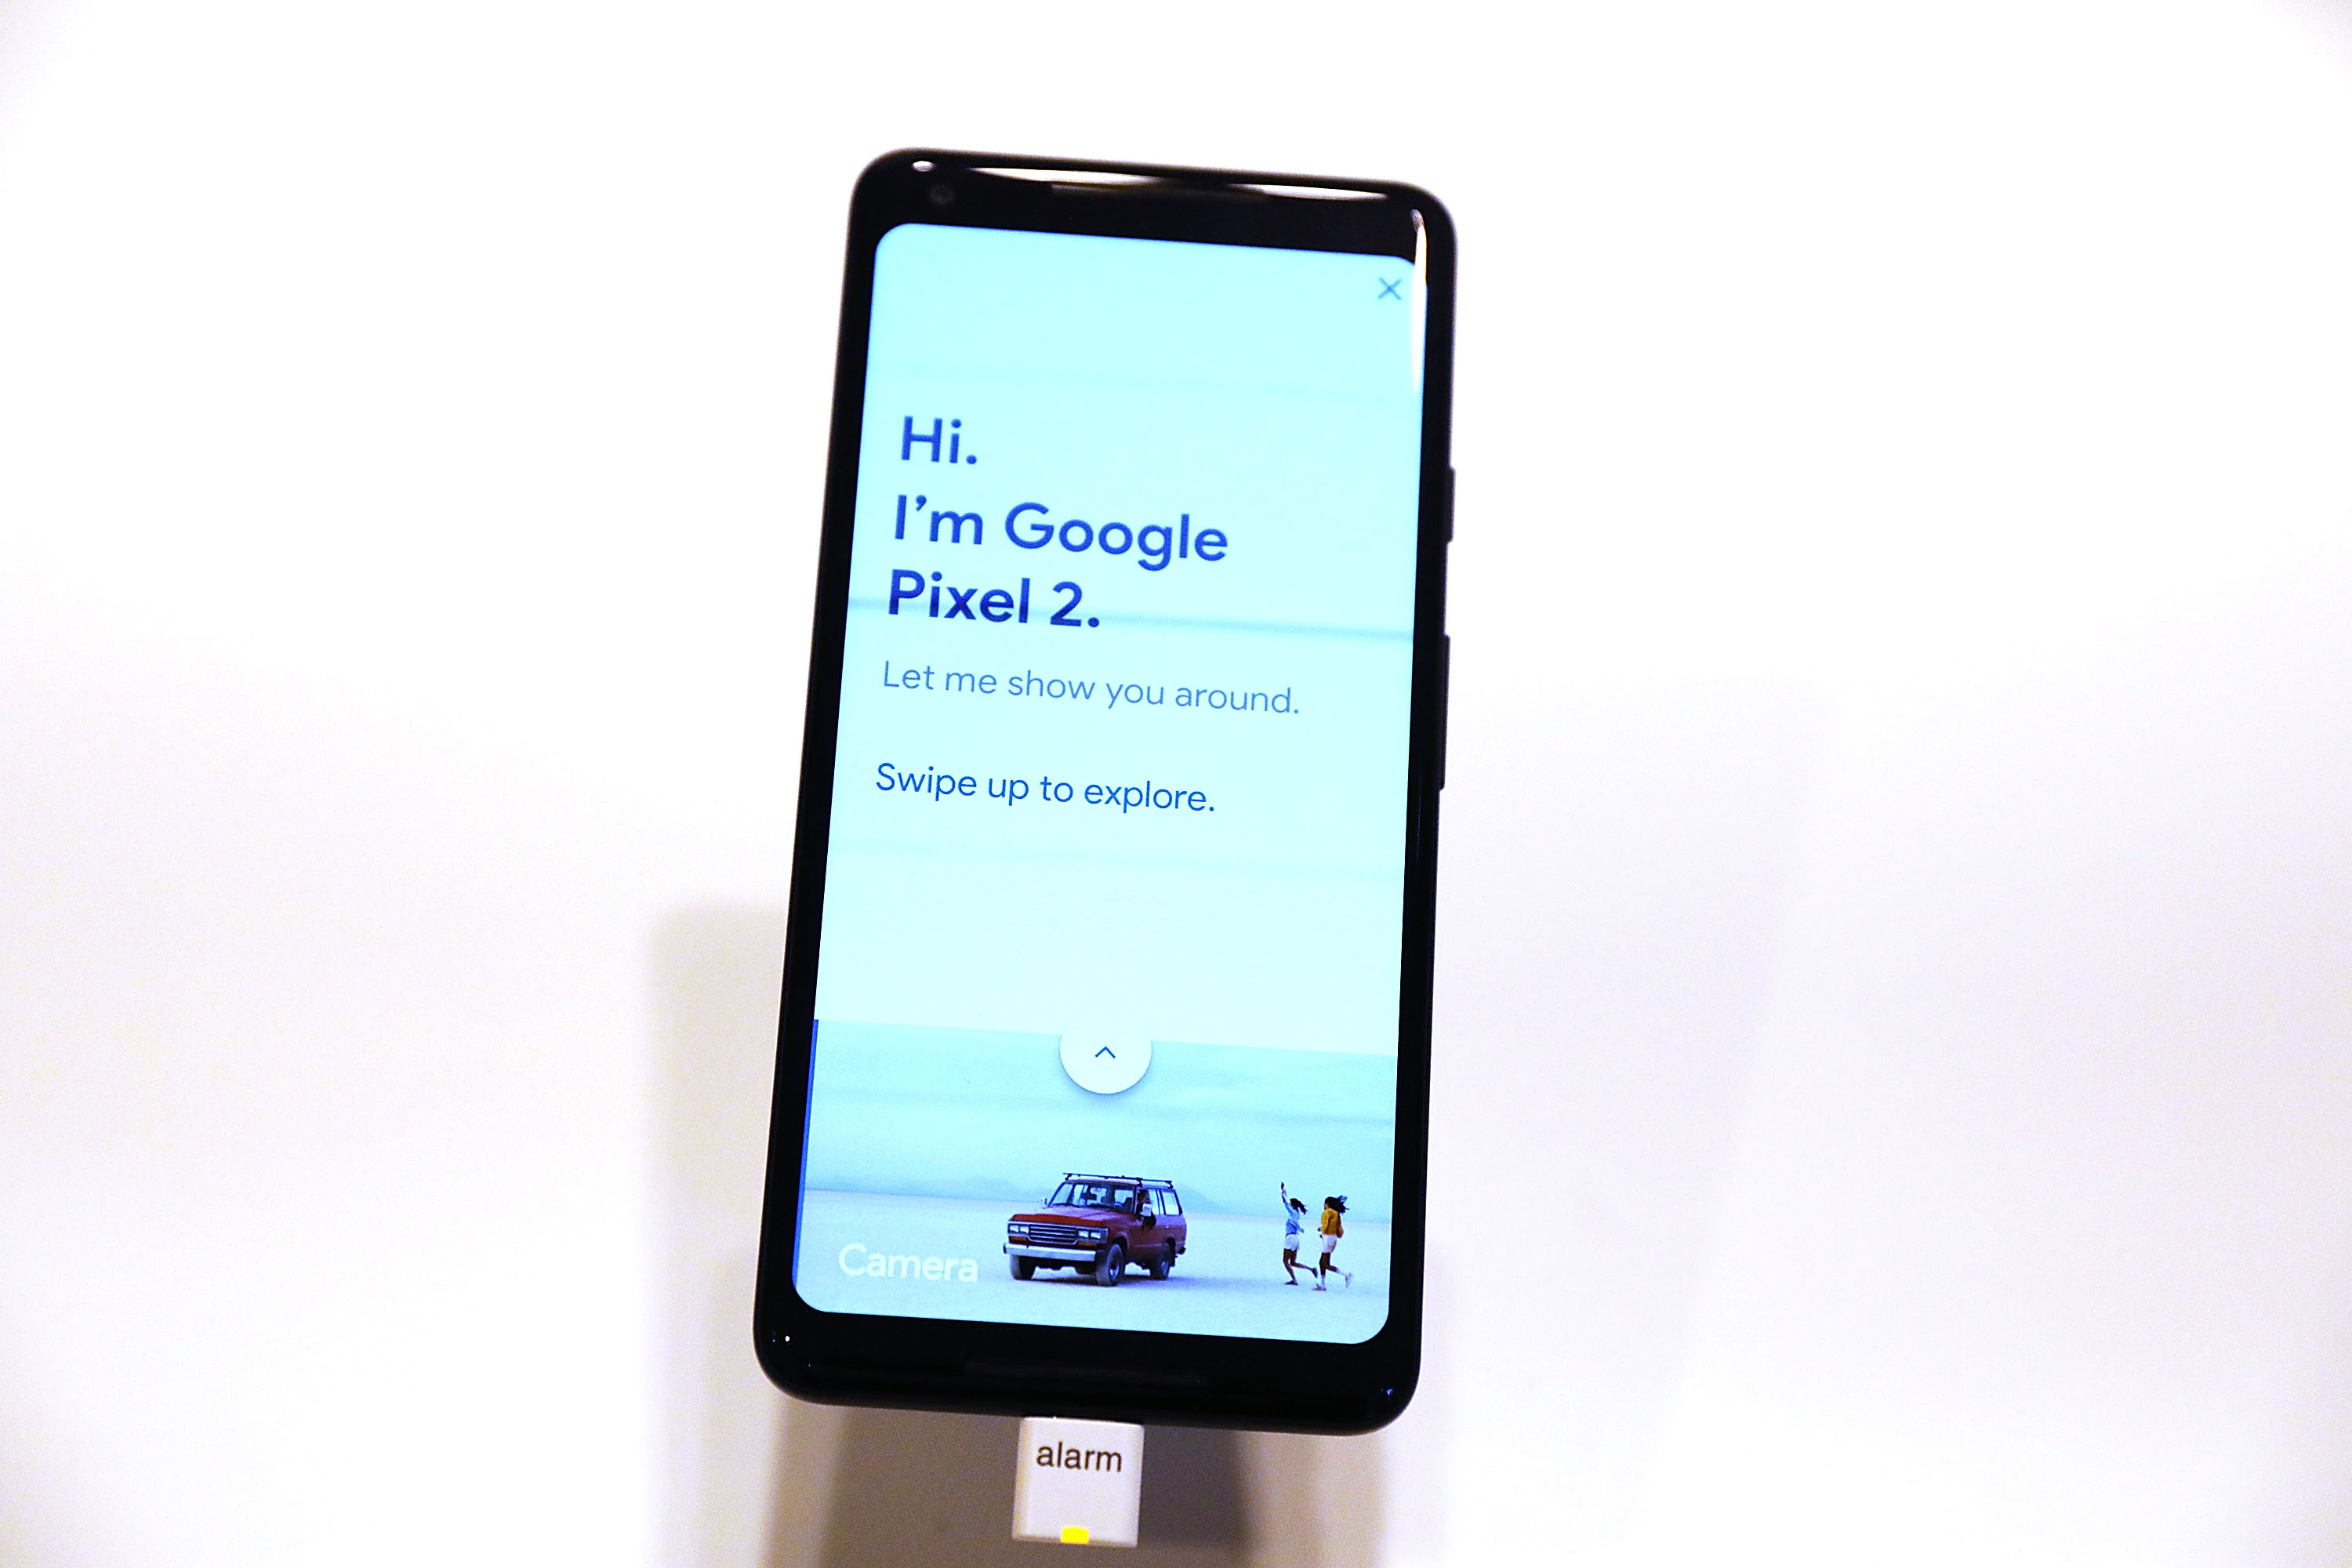 Google's new Pixel 2 phone sits on display at a New York City pop-up shop on October 19, 2017 in New York City. (Spencer Platt—Getty Images)